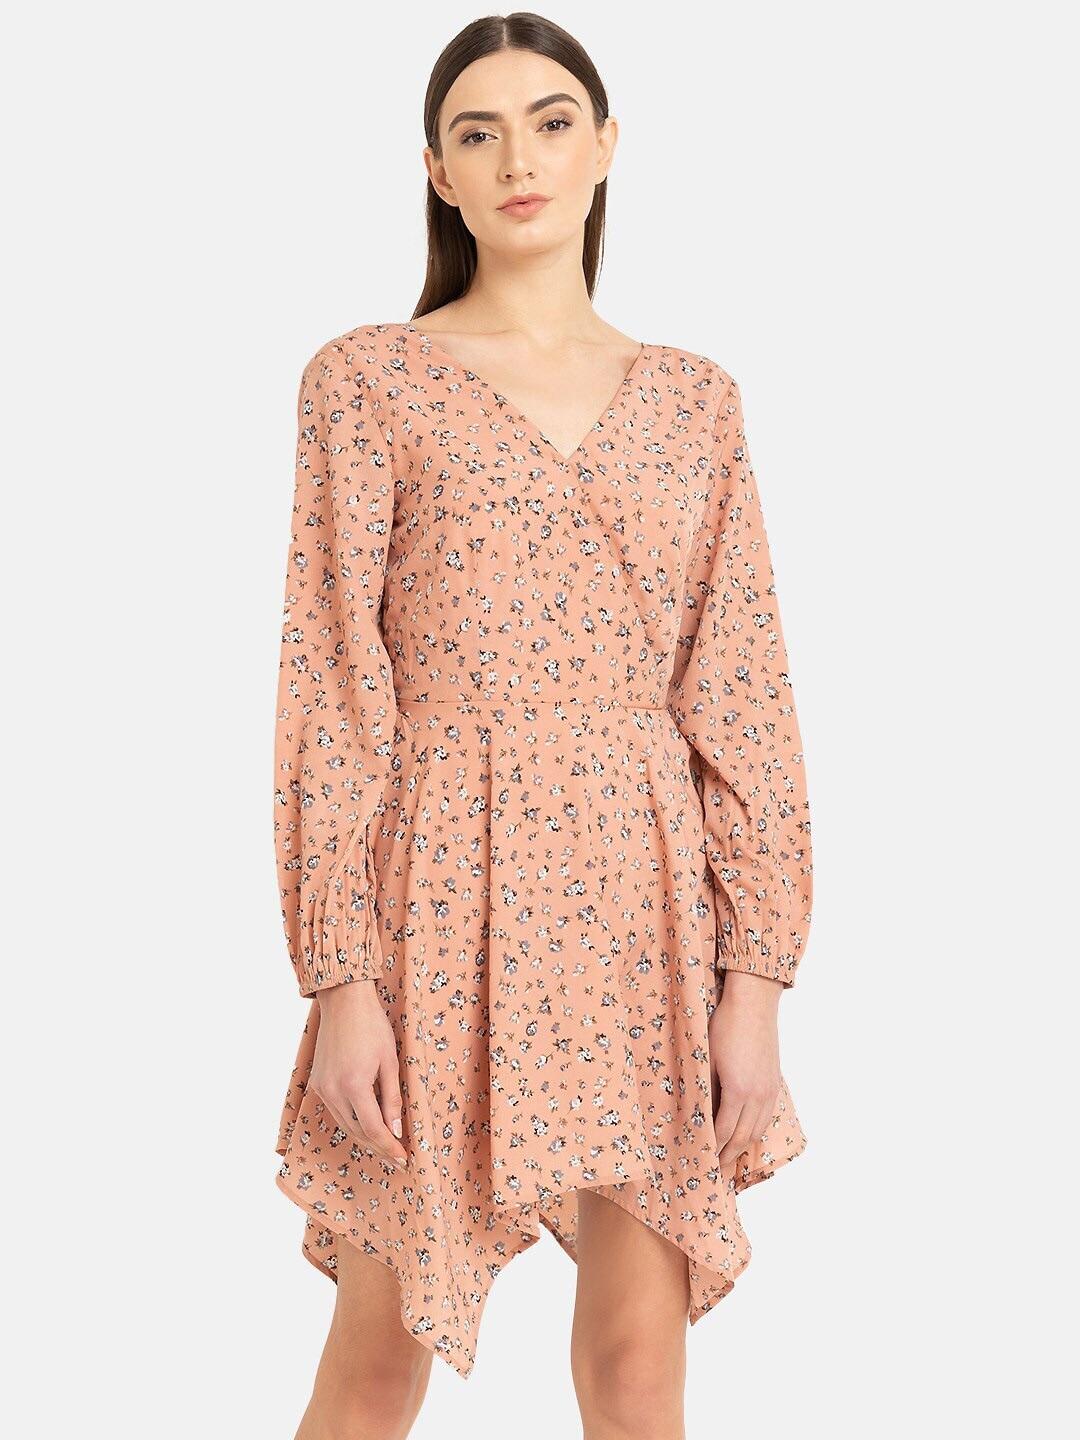 Kazo Pink Floral Printed Wrap Dress with Elastic Cuffed Sleeves